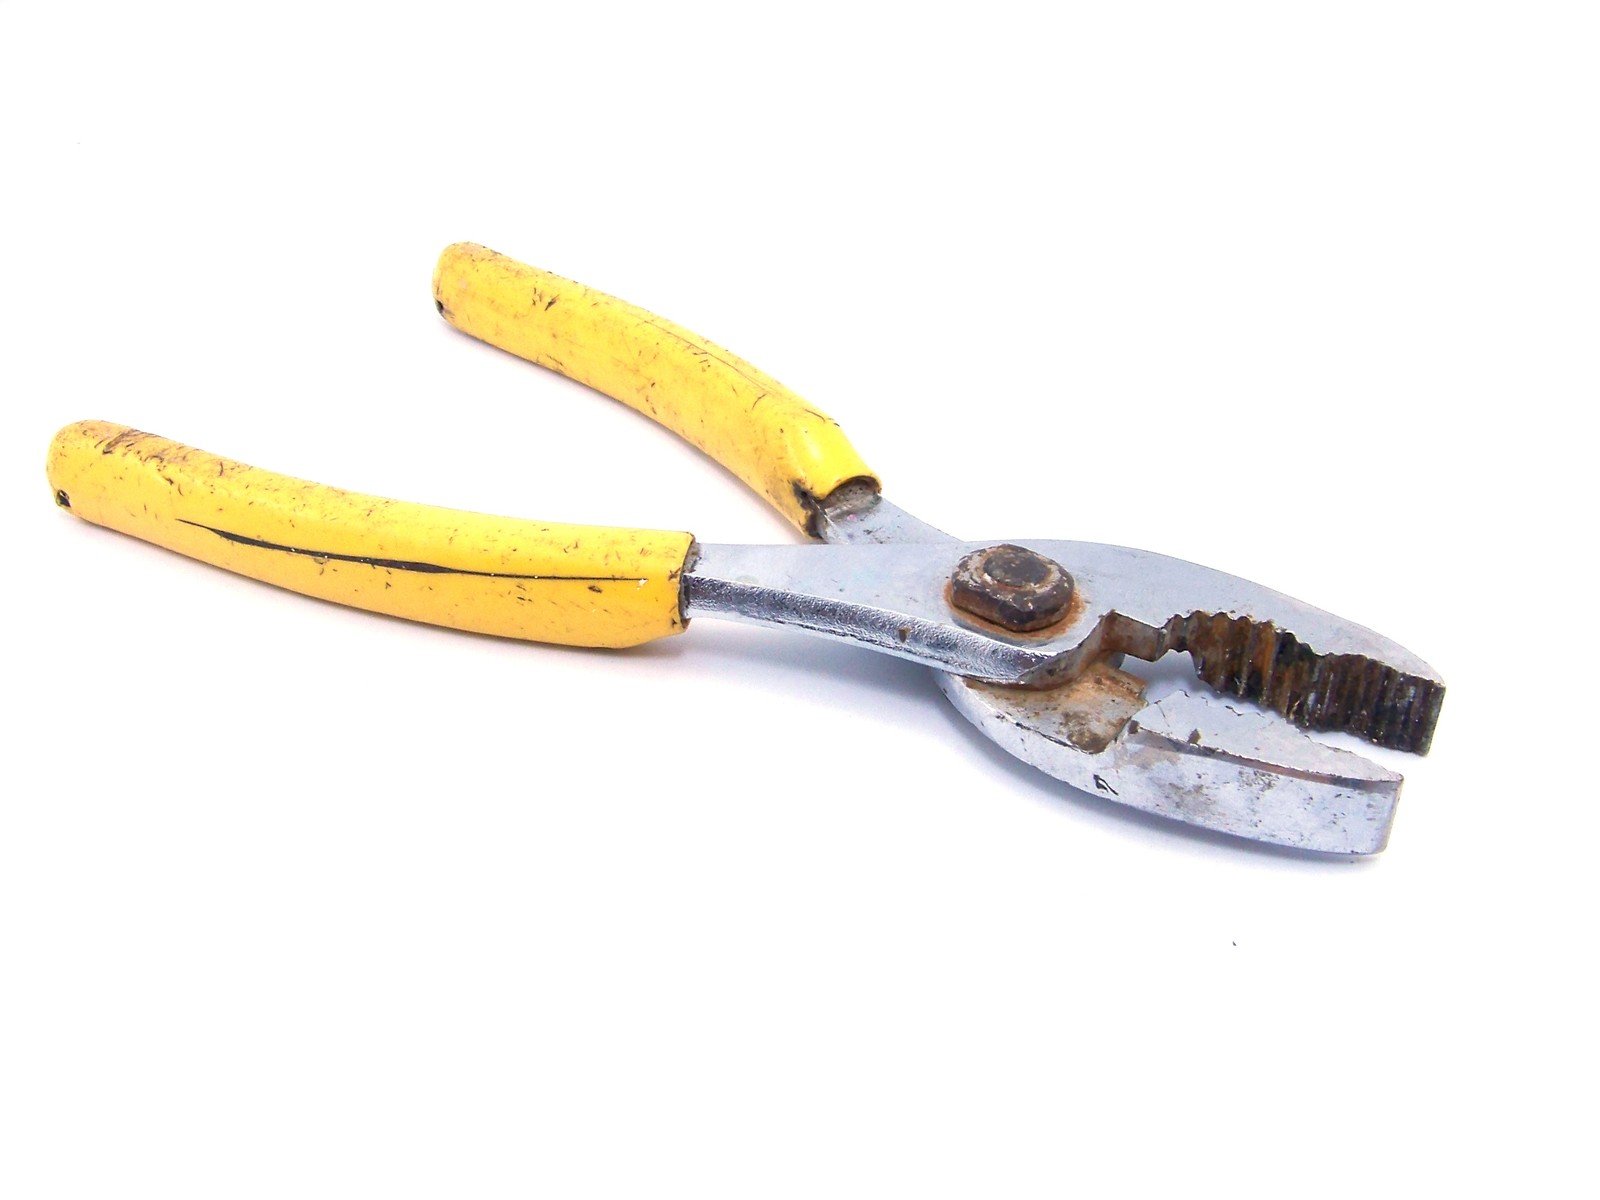 a pair of pliers with yellow handles laying on top of each other